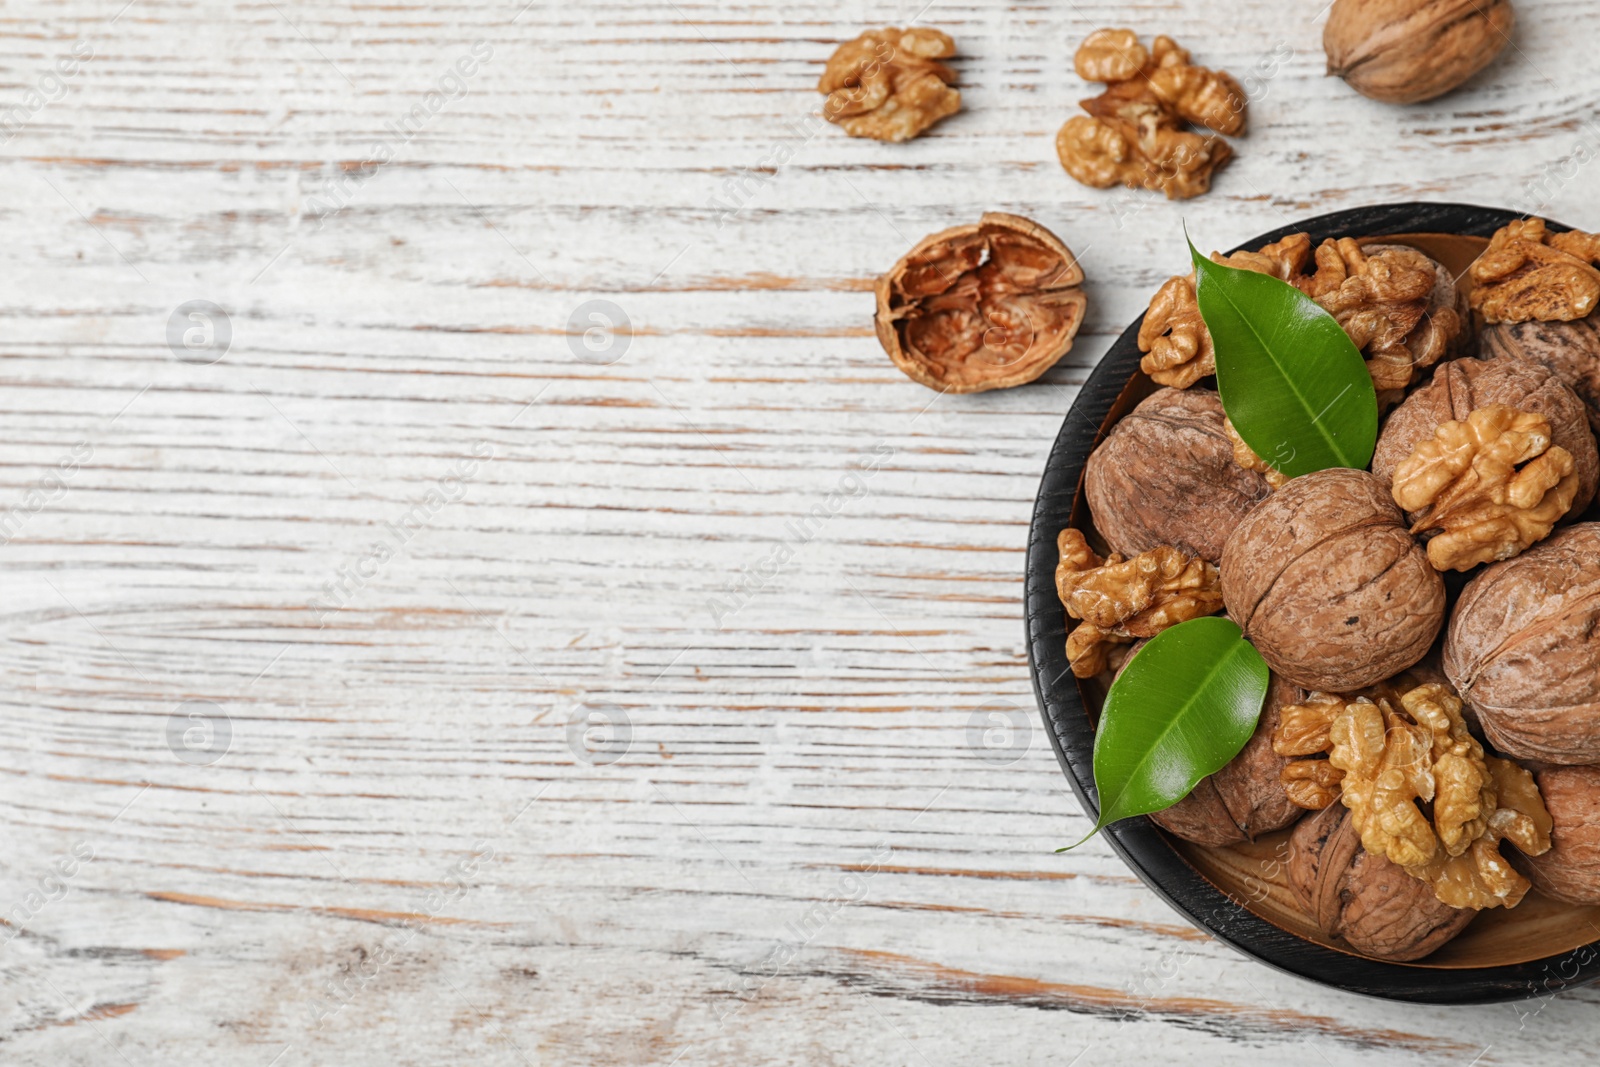 Photo of Plate with walnuts and space for text on wooden background, top view